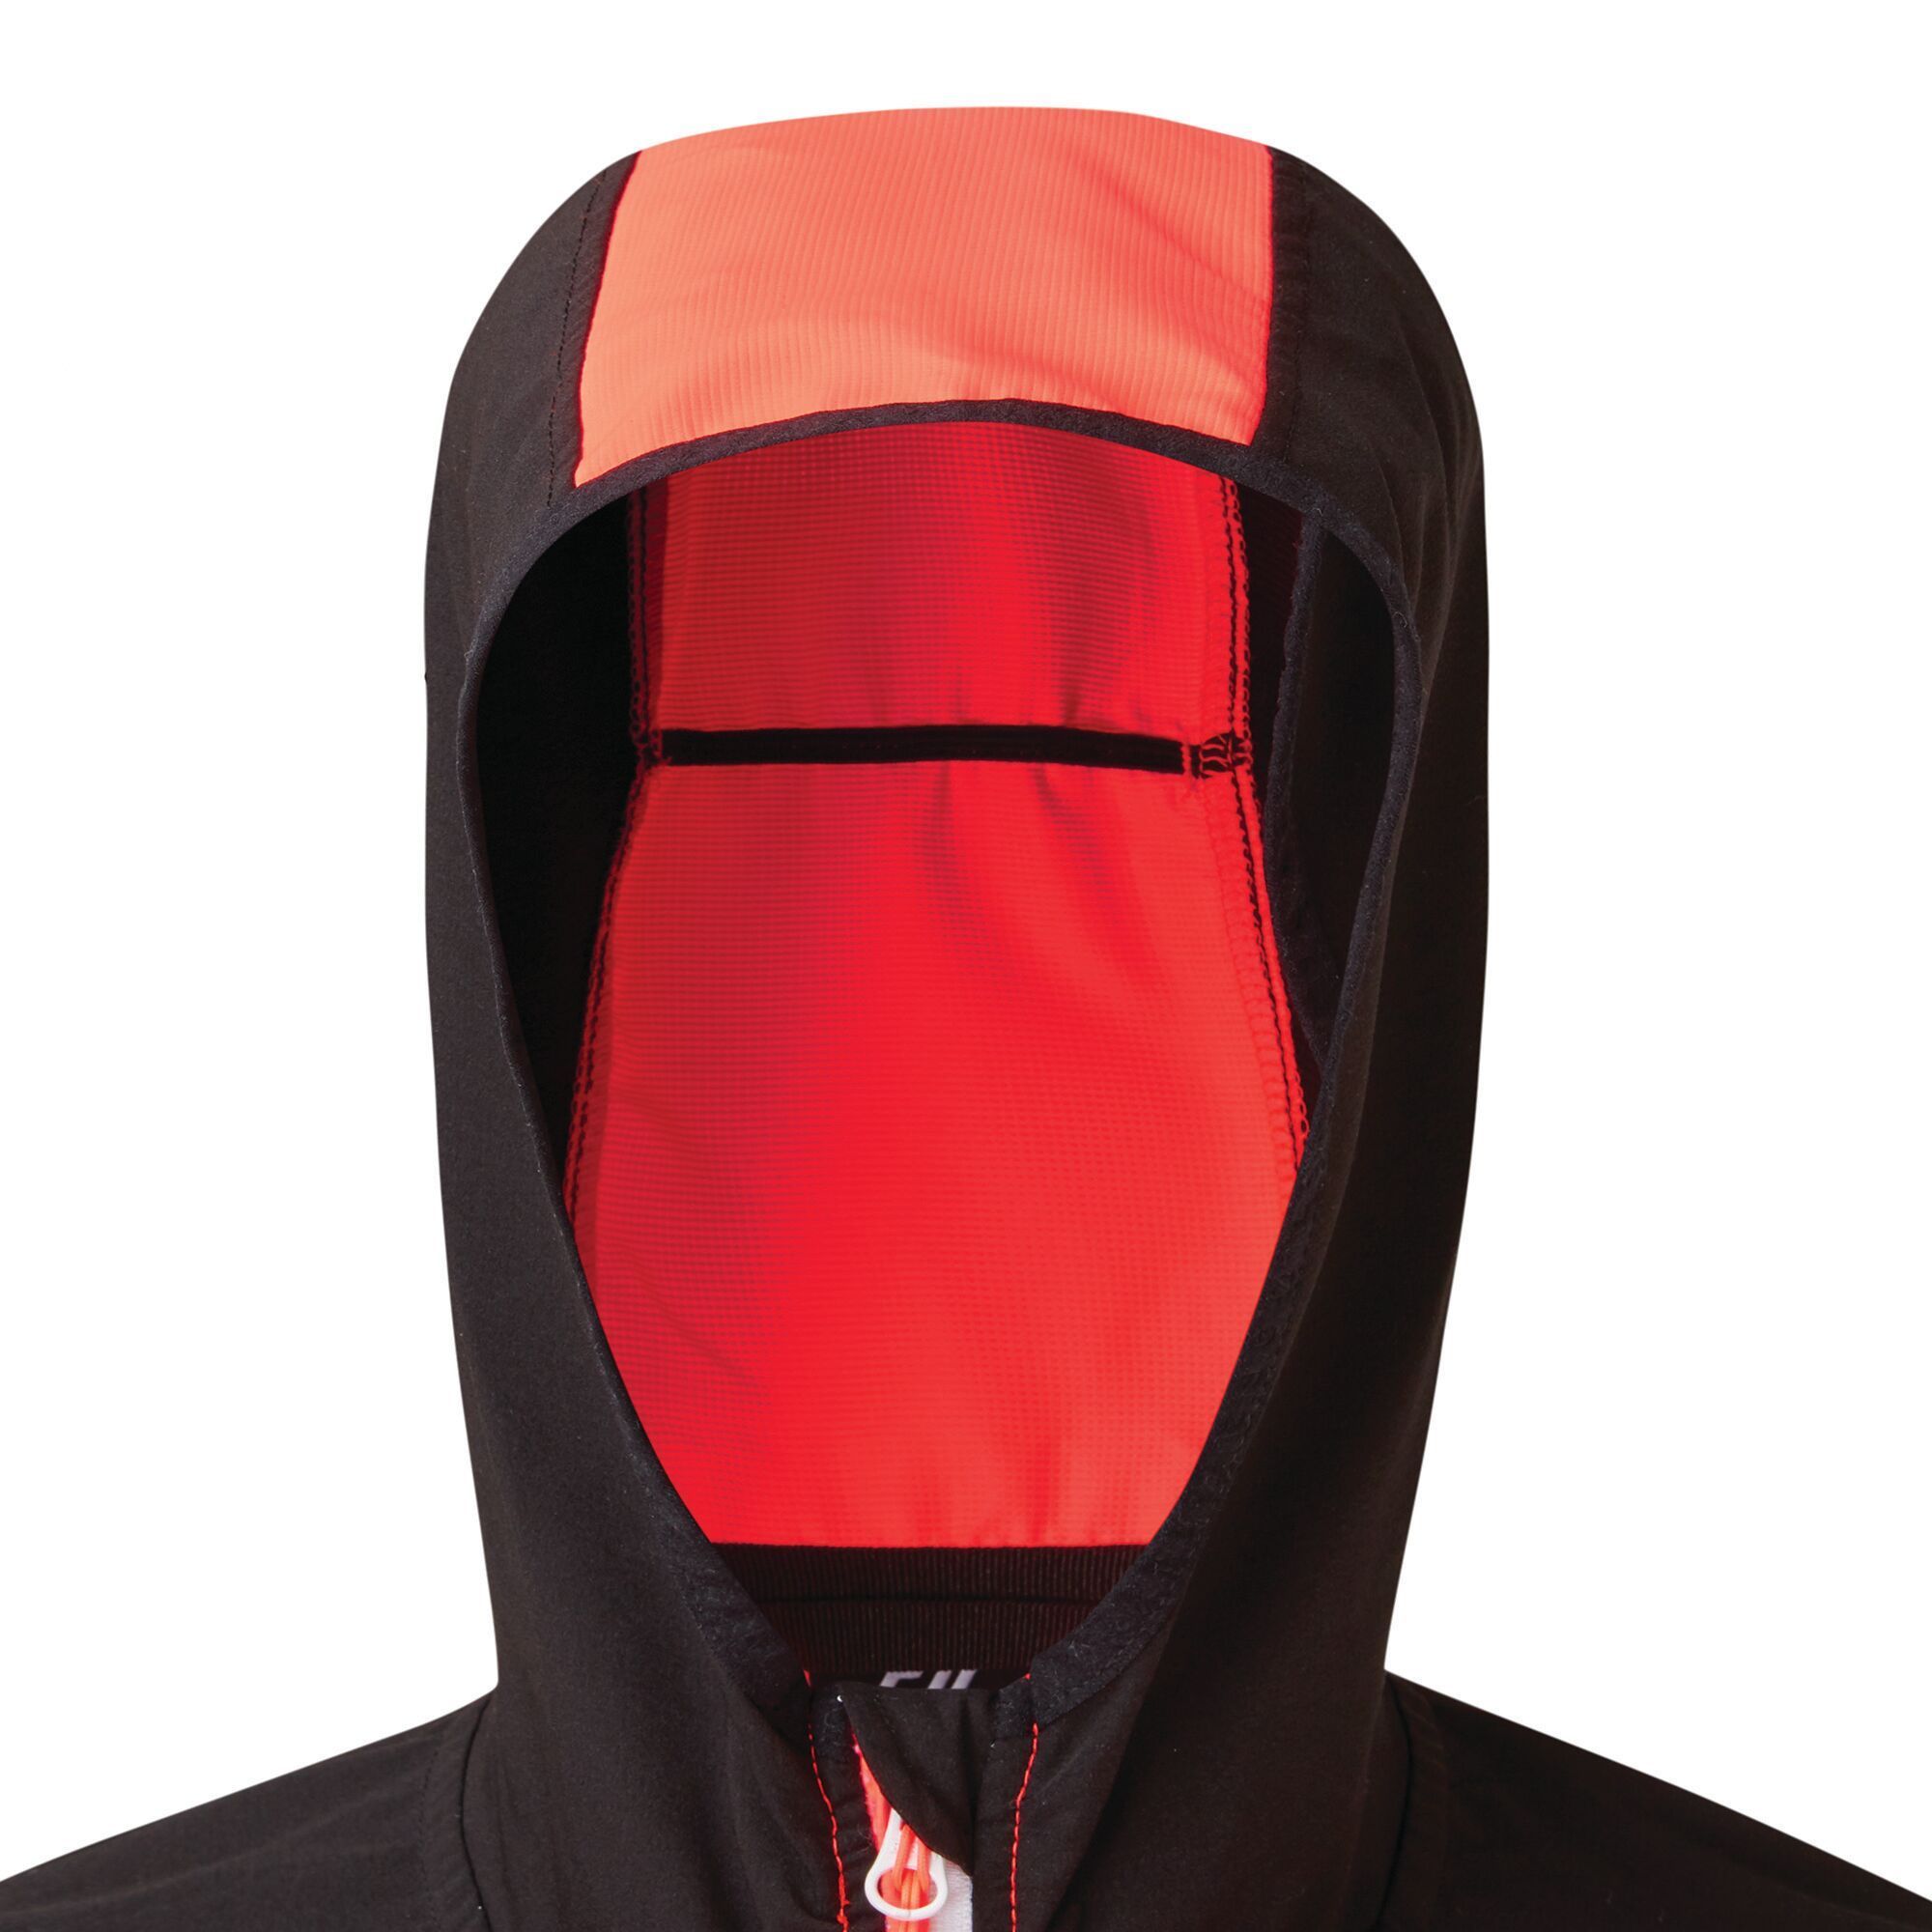 Material: 94% Polyester, 6% Elastane. Lightweight, water-resistant and highly breathable softshell jacket made from Ilus Softshell woven stretch polyester fabric. Streamlined design with a close-fitting, elasticated hood. Stretch binding to hood and hem. 2 zipped lower pockets.